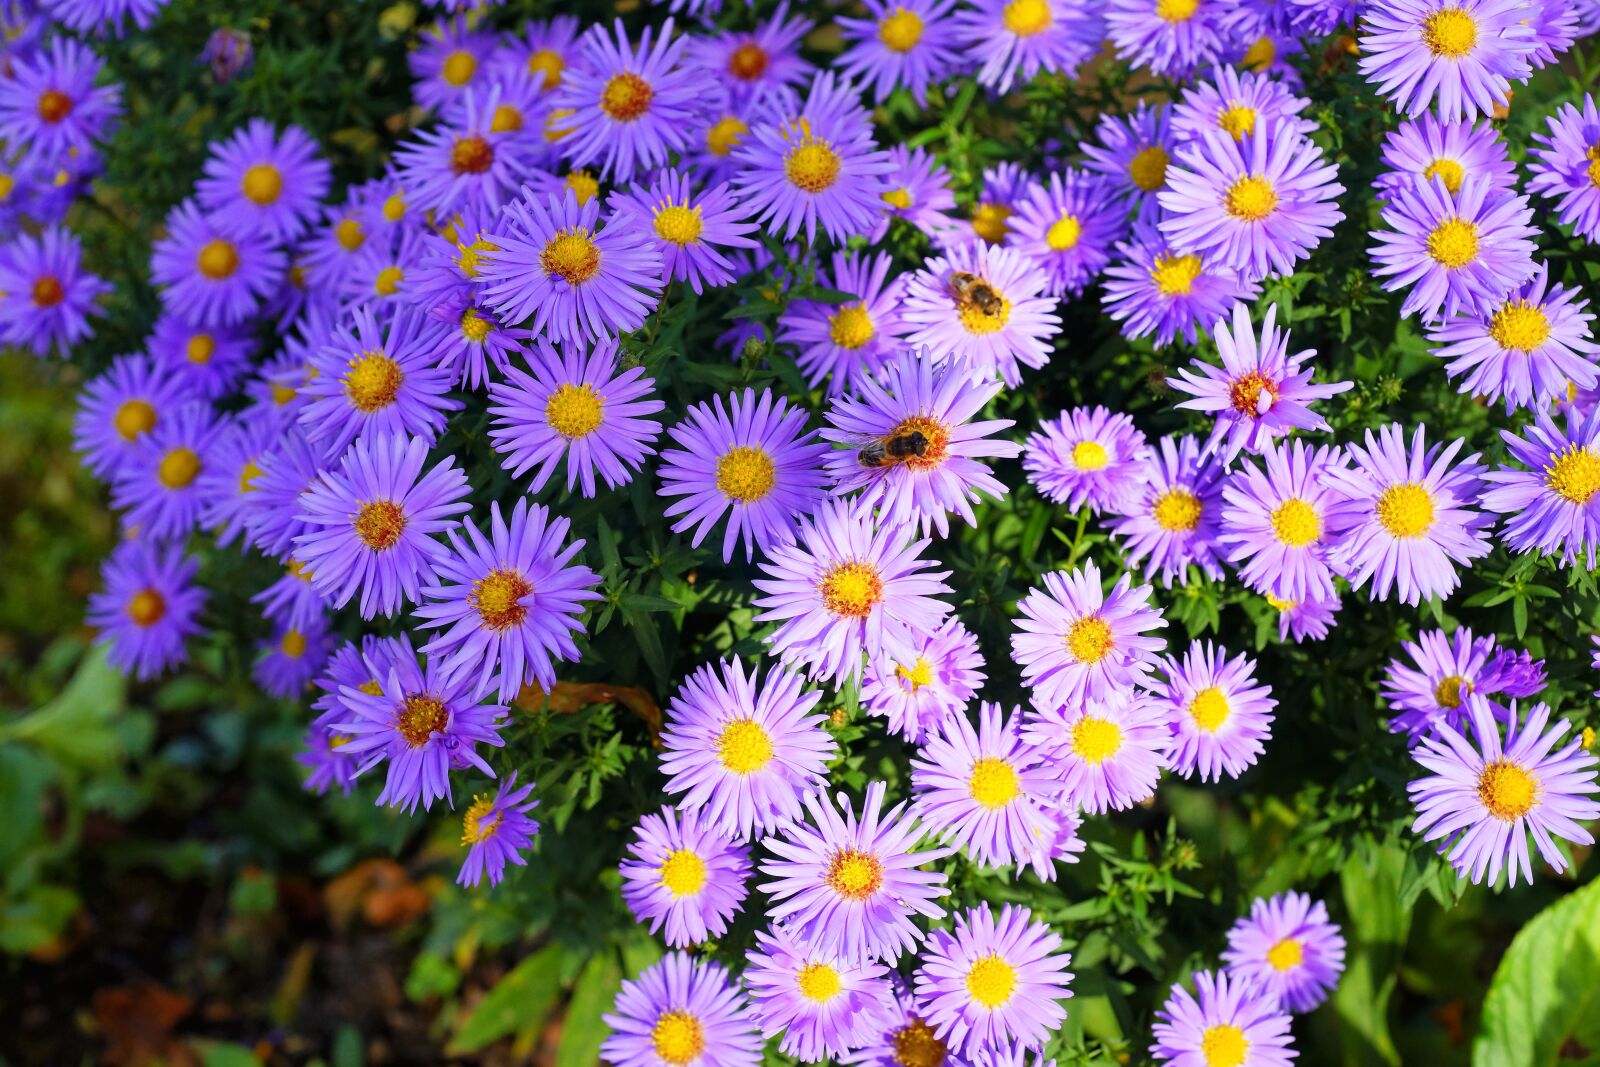 Sony a99 II sample photo. Flowers, asters, lichtspiel photography